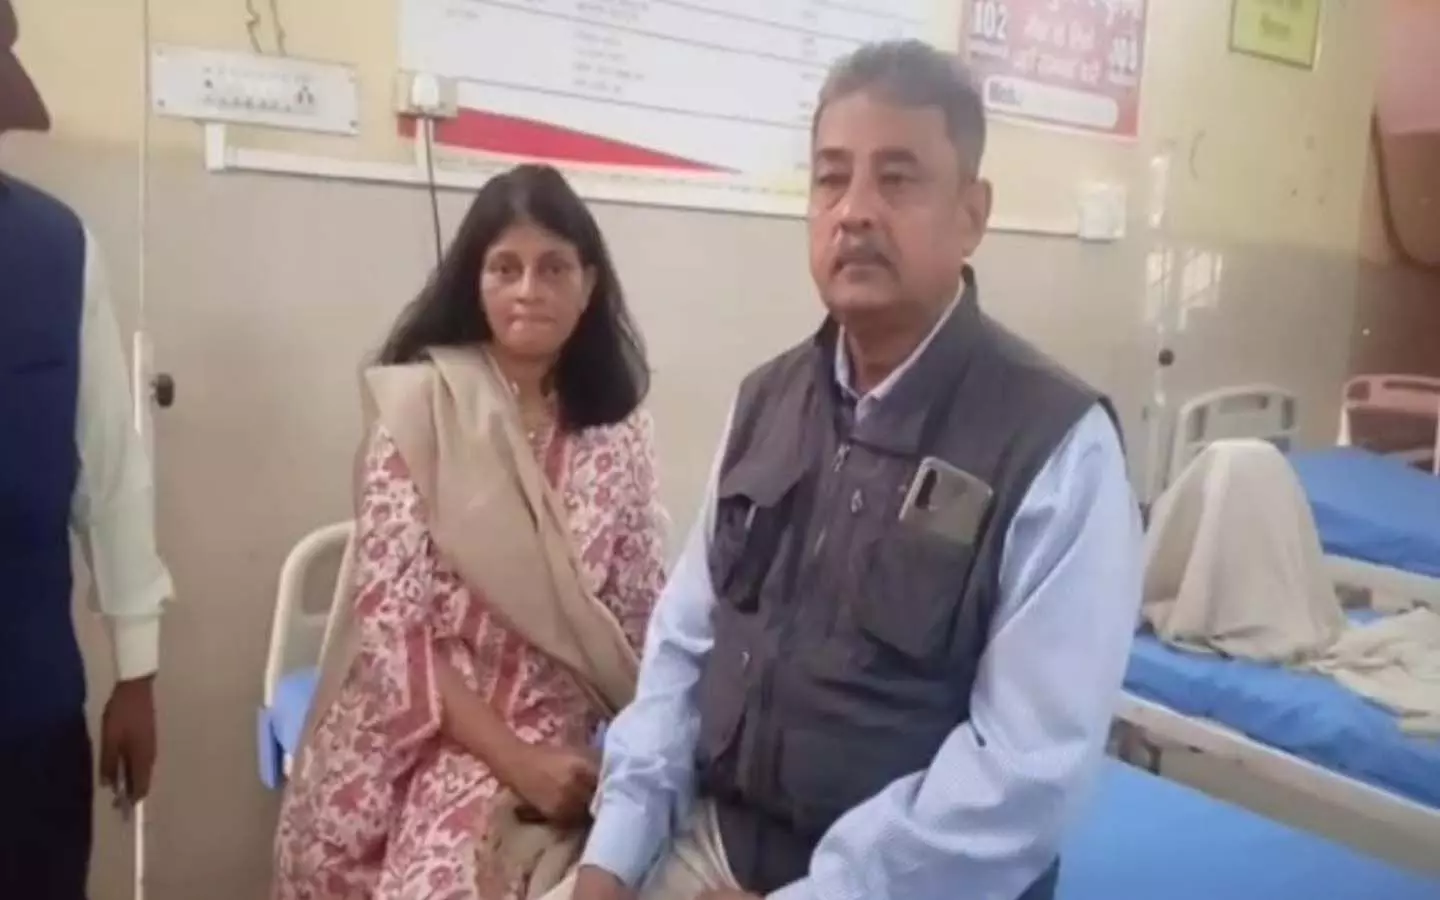 Fatehpur Crime News: Dabangs abused and assaulted retired colonel and his wife on the way, police registered a case